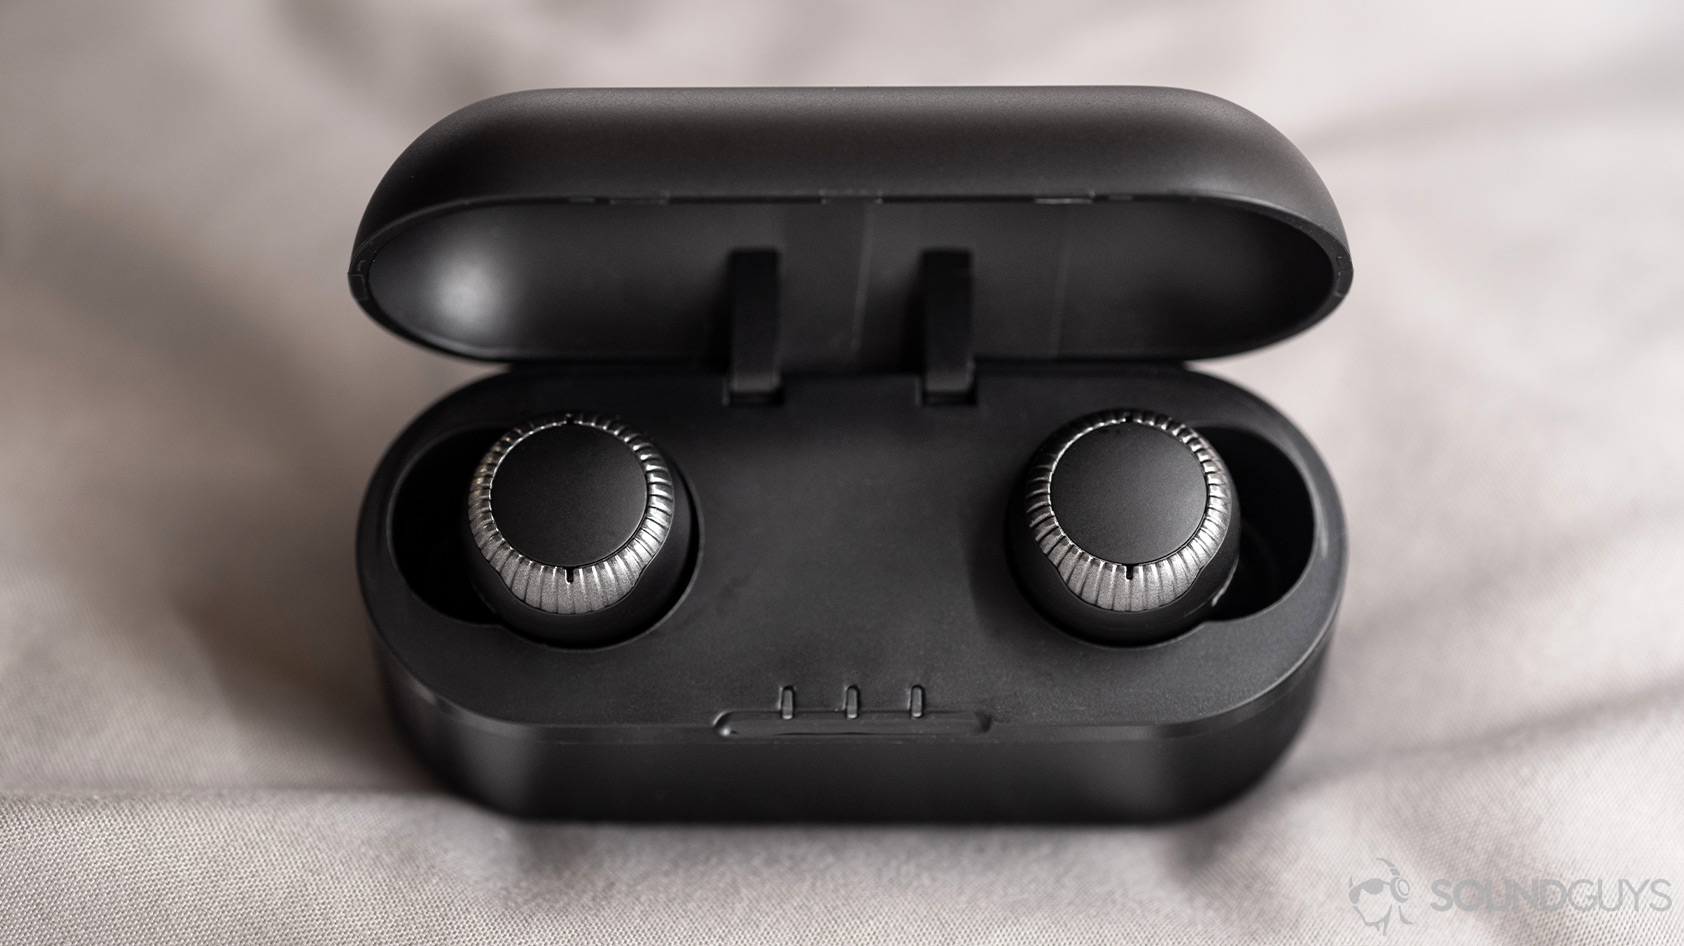 An aerial photo of the Panasonic RZ-S300W true wireless earbuds in the open charging case.